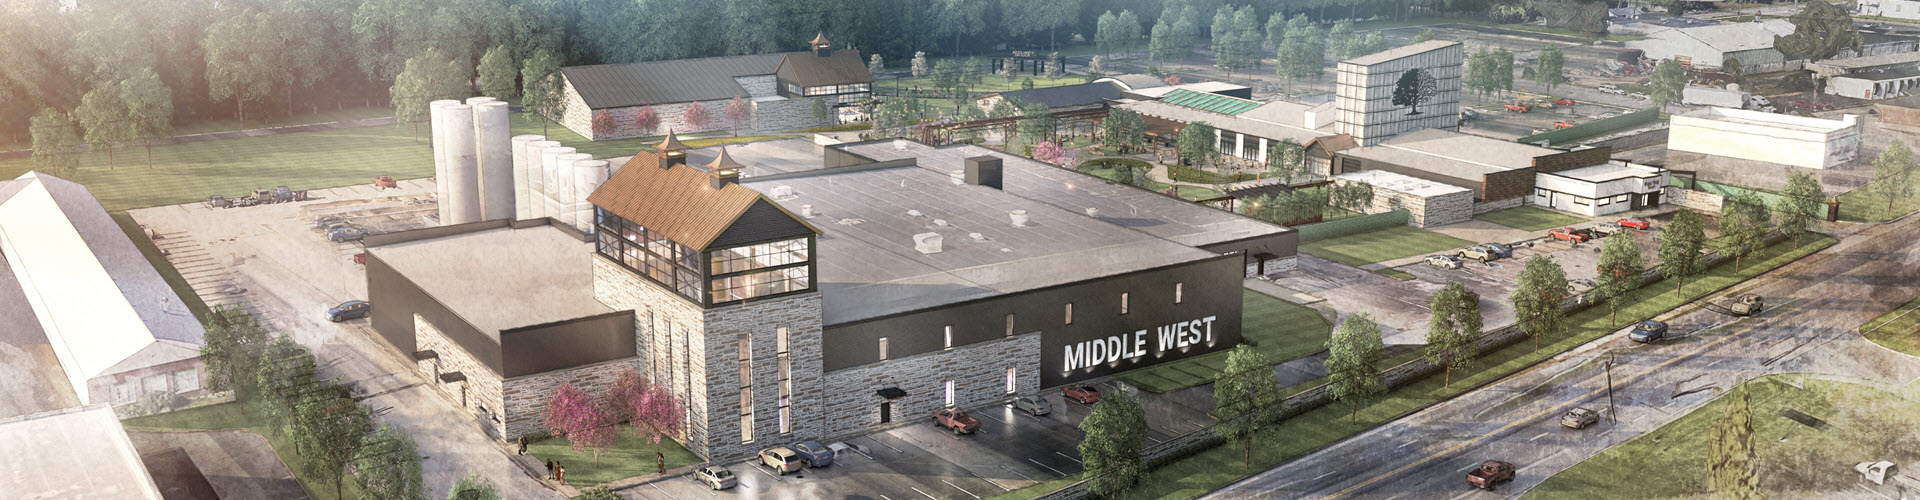 Middle West Spirits - New Distillery in Columbus, Ohio